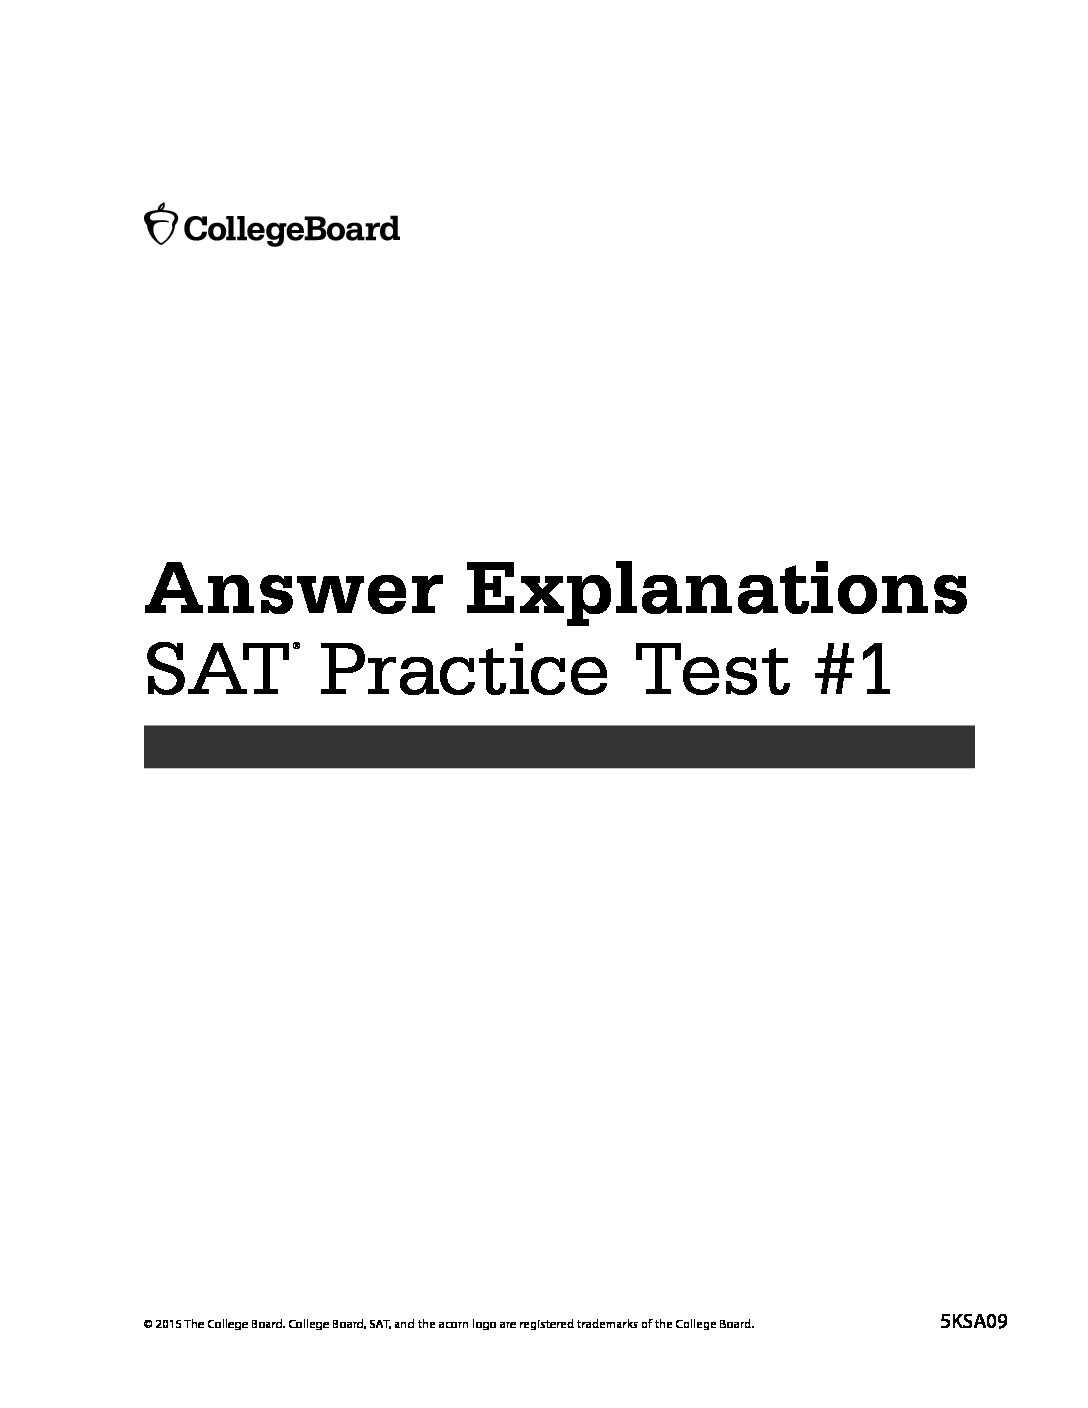 SAT Practice Test 5 Answer Explanations